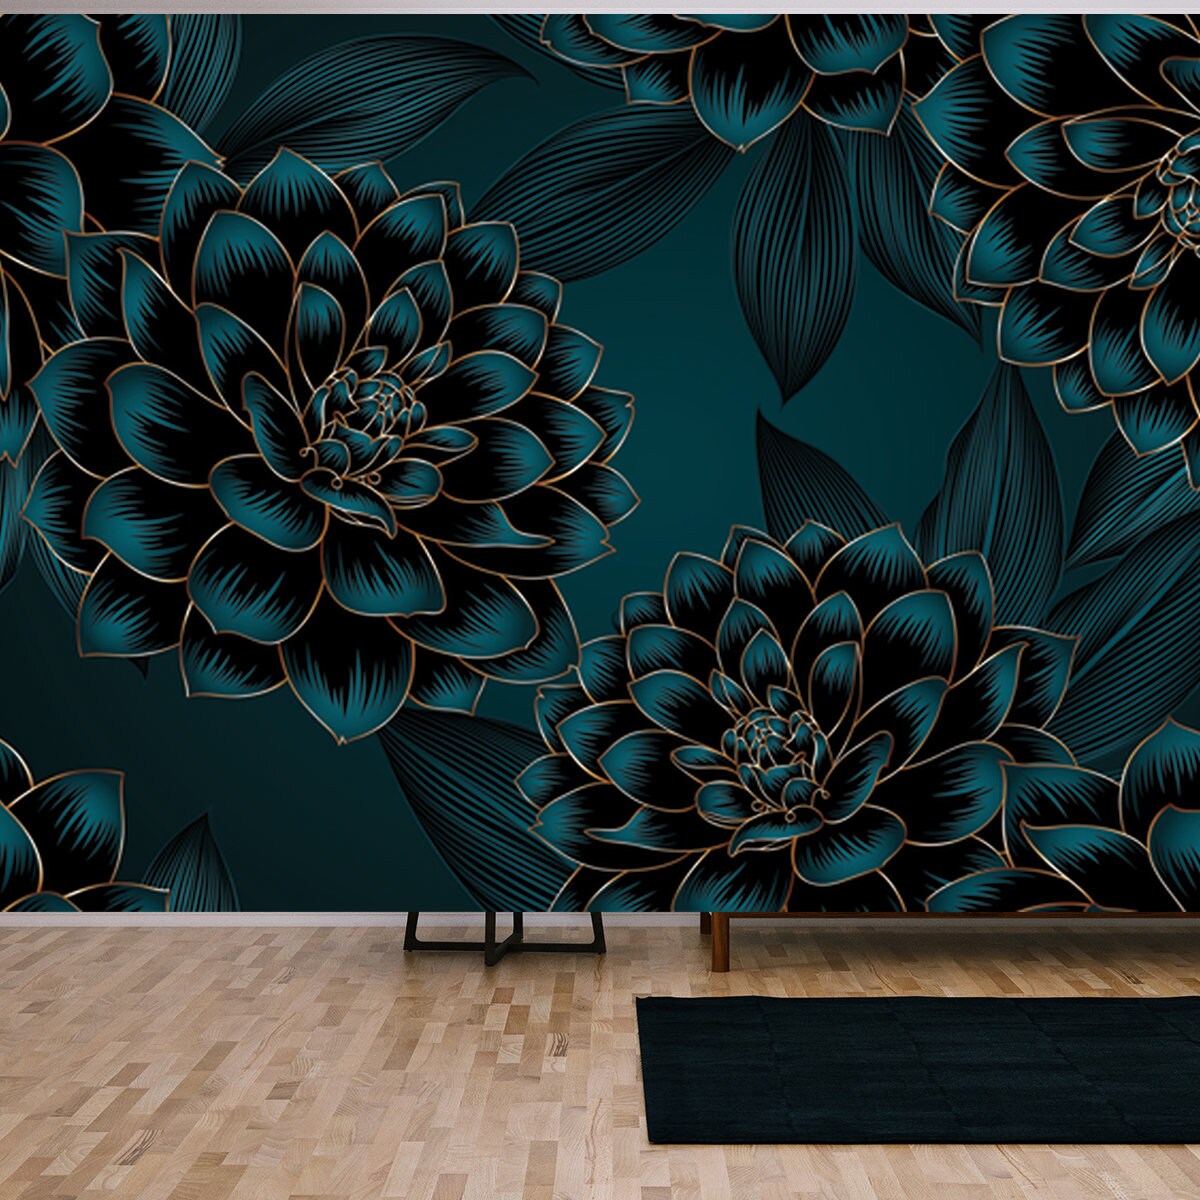 Luxurious Vintage Seamless Pattern with Golden Flowers Dahlia and Leaves Wallpaper Living Room Mural